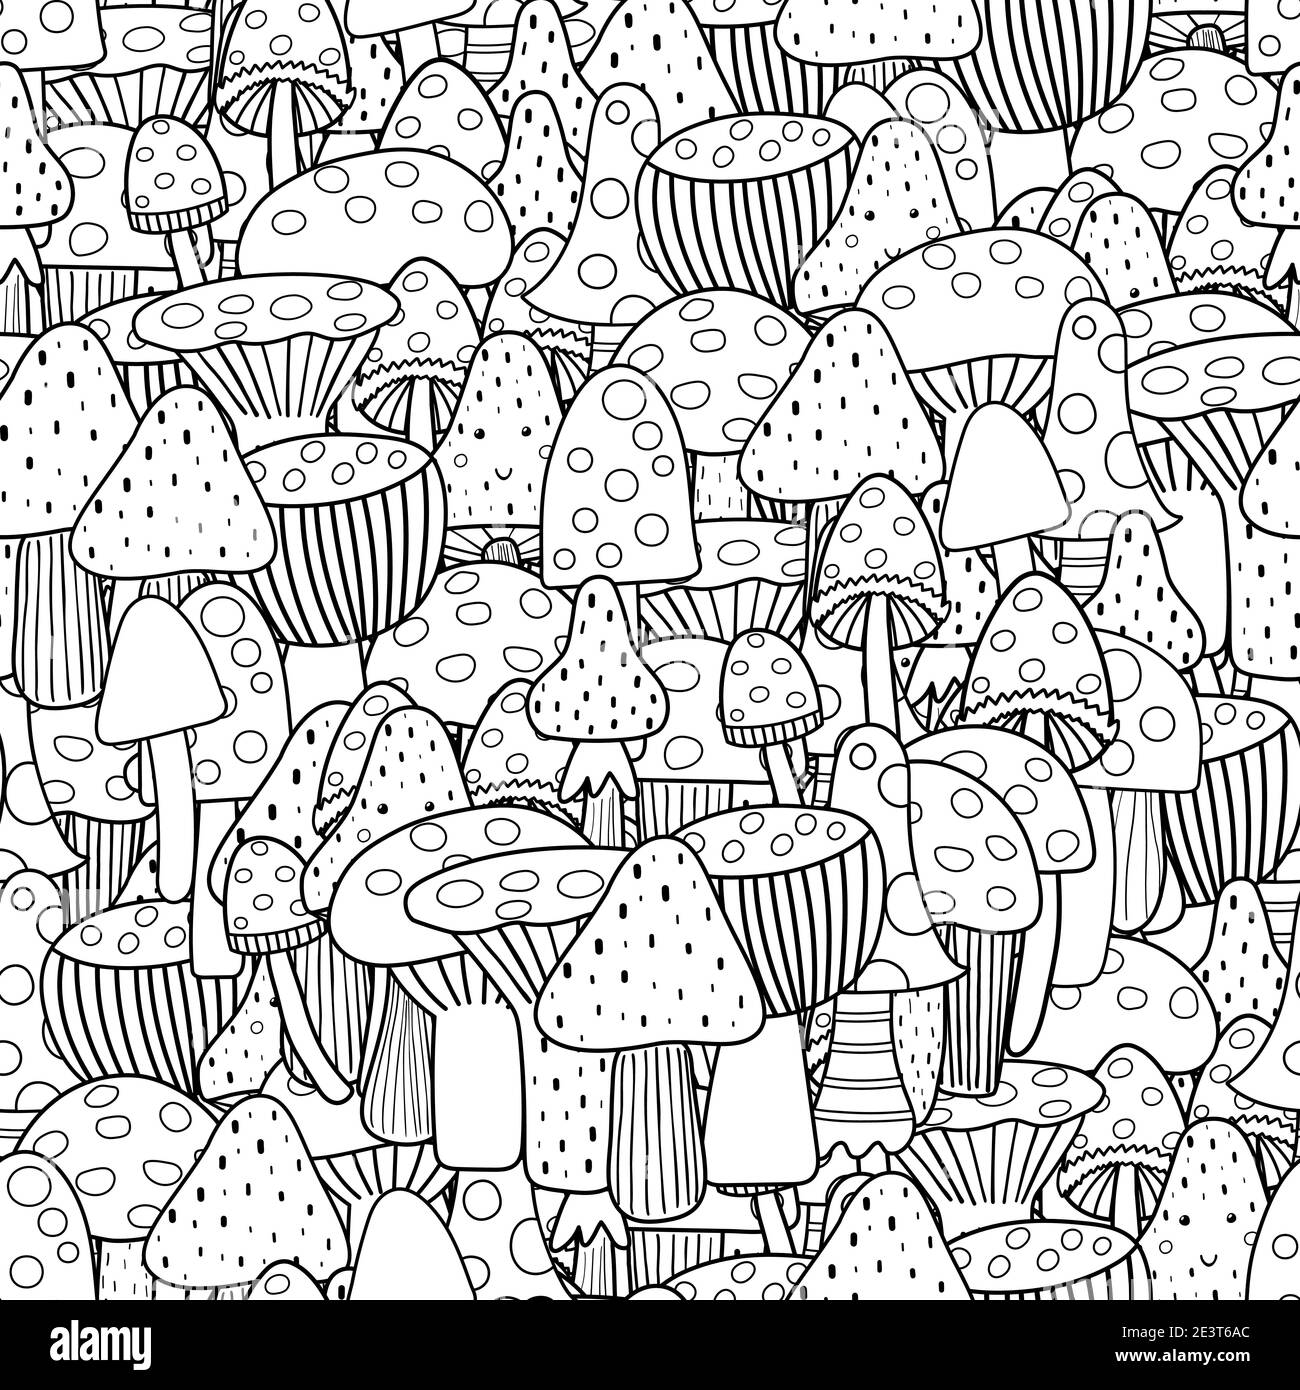 Doodle mushrooms seamless pattern. Fantasy forest coloring page. Black and white print  Stock Vector